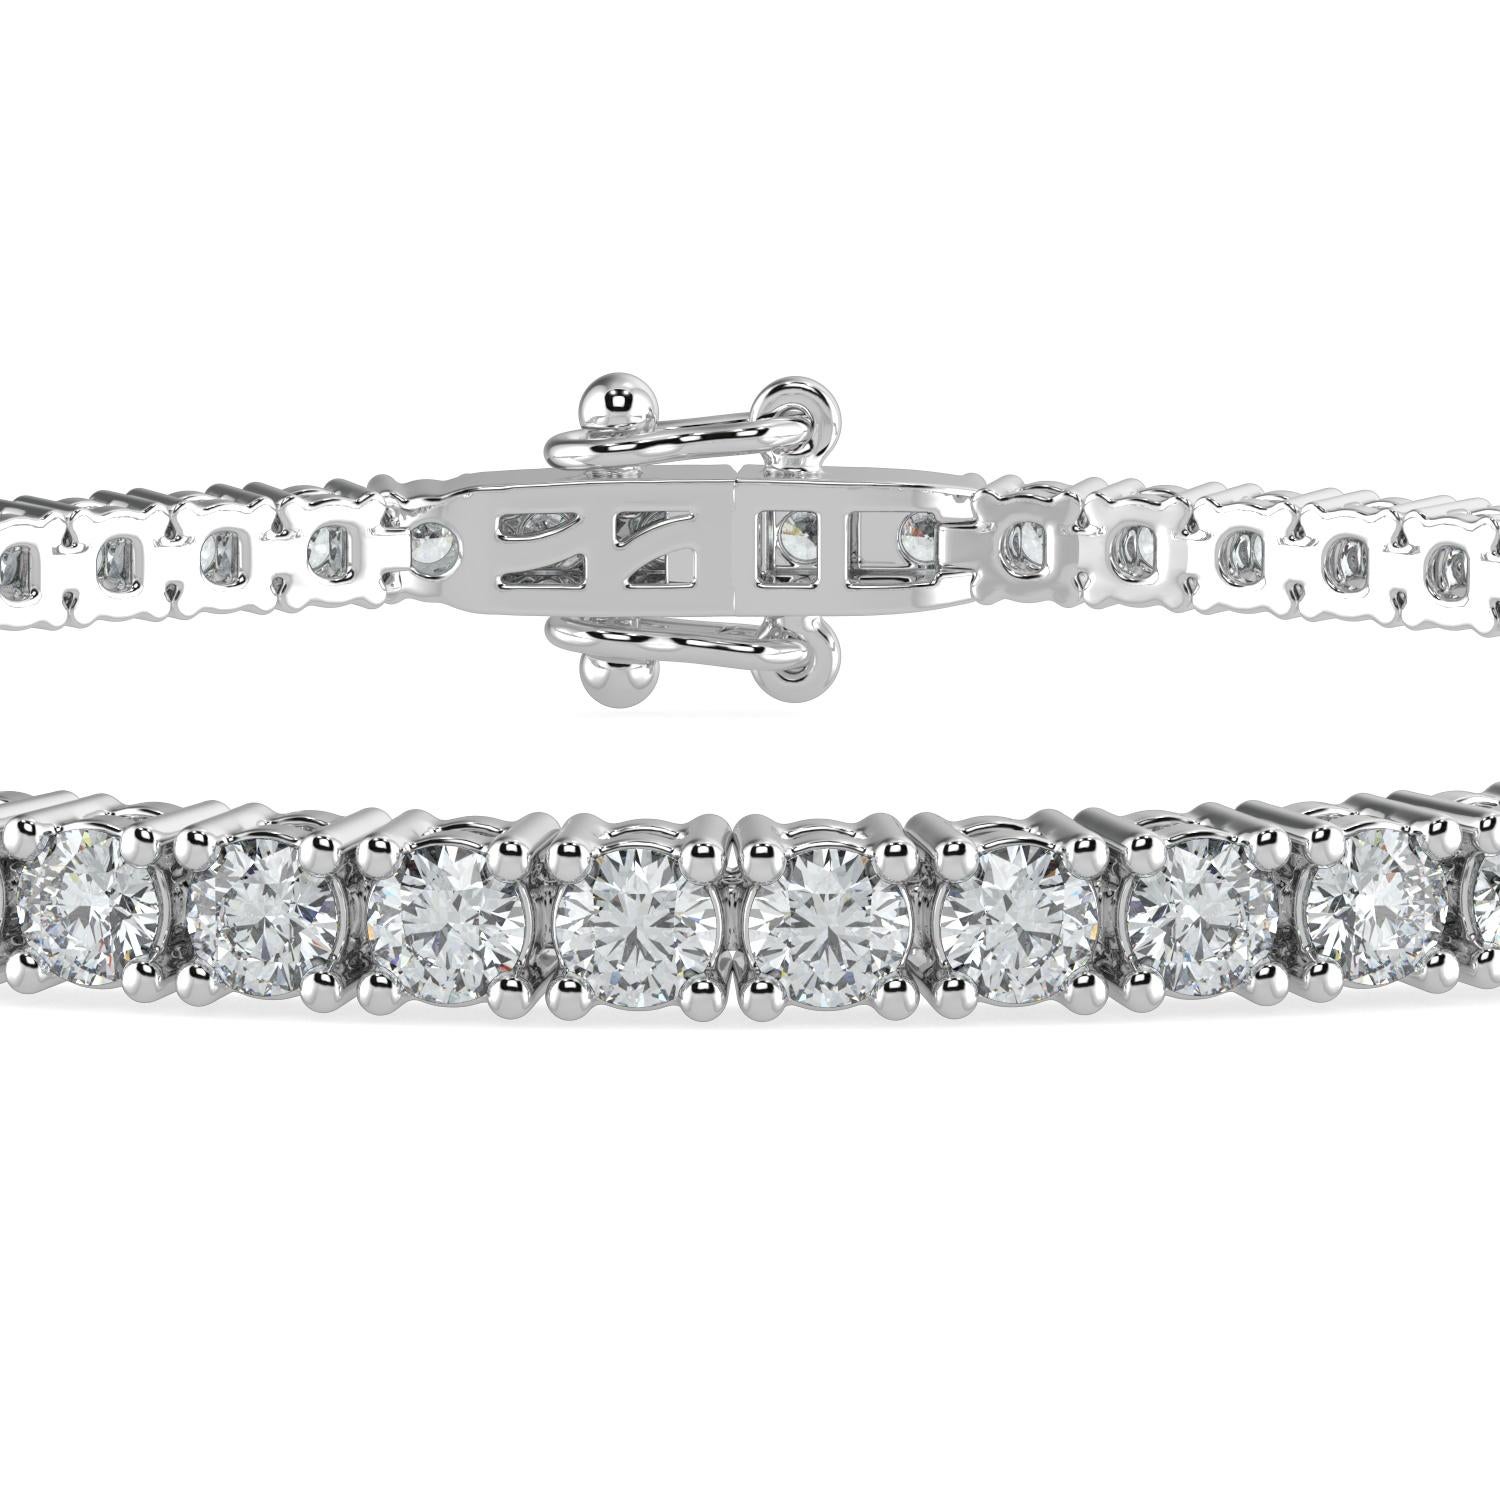 5.00 Carat Round Cut GH-SI Natural Diamond Classic Tennis Bracelet 4 Prong 14K White Gold for Women

Specification
Brand: AAMIAA
Length: 7 Inches 
Color: GH
Carat Weight:5CTW
Clarity: SI

LUXURIOUS AND LASTING- Our bracelets are a luxurious and